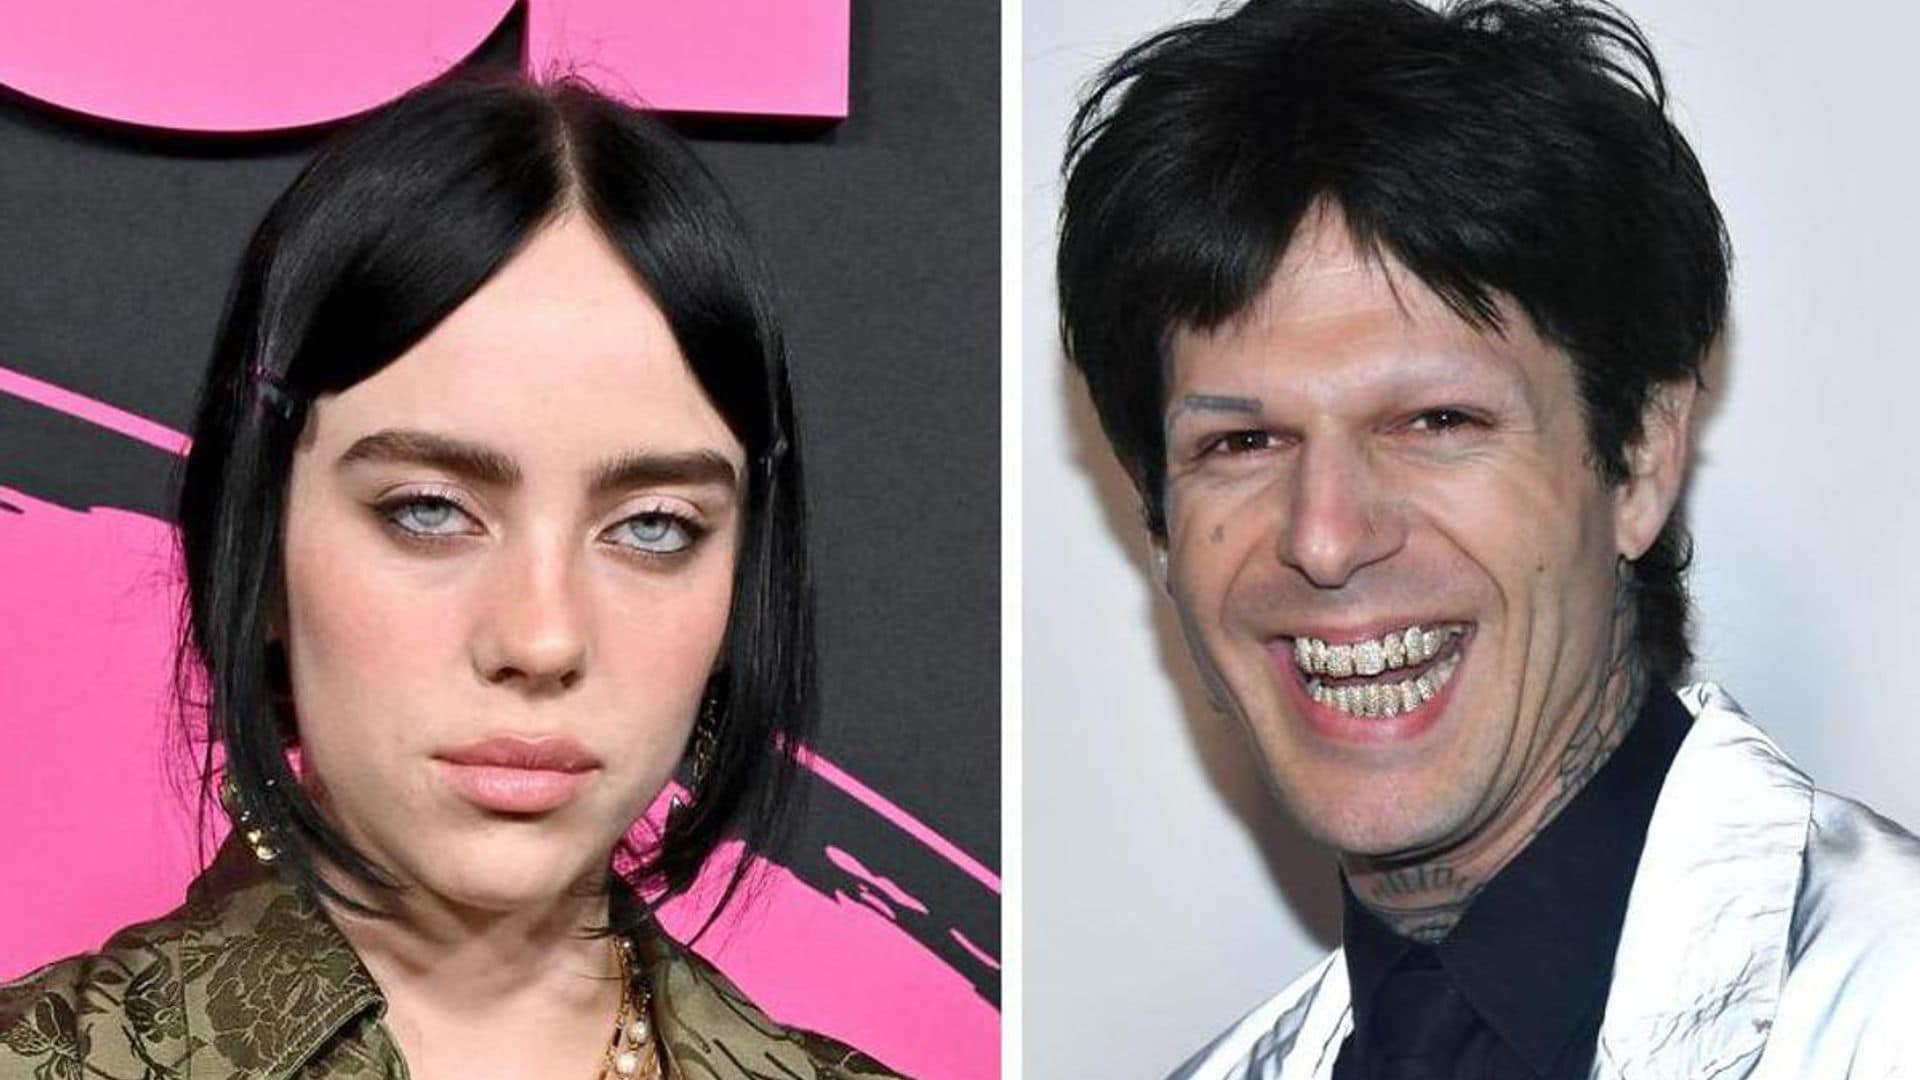 Billie Eilish and Jesse Rutherford pack on the PDA; who is the 31-year-old singer?